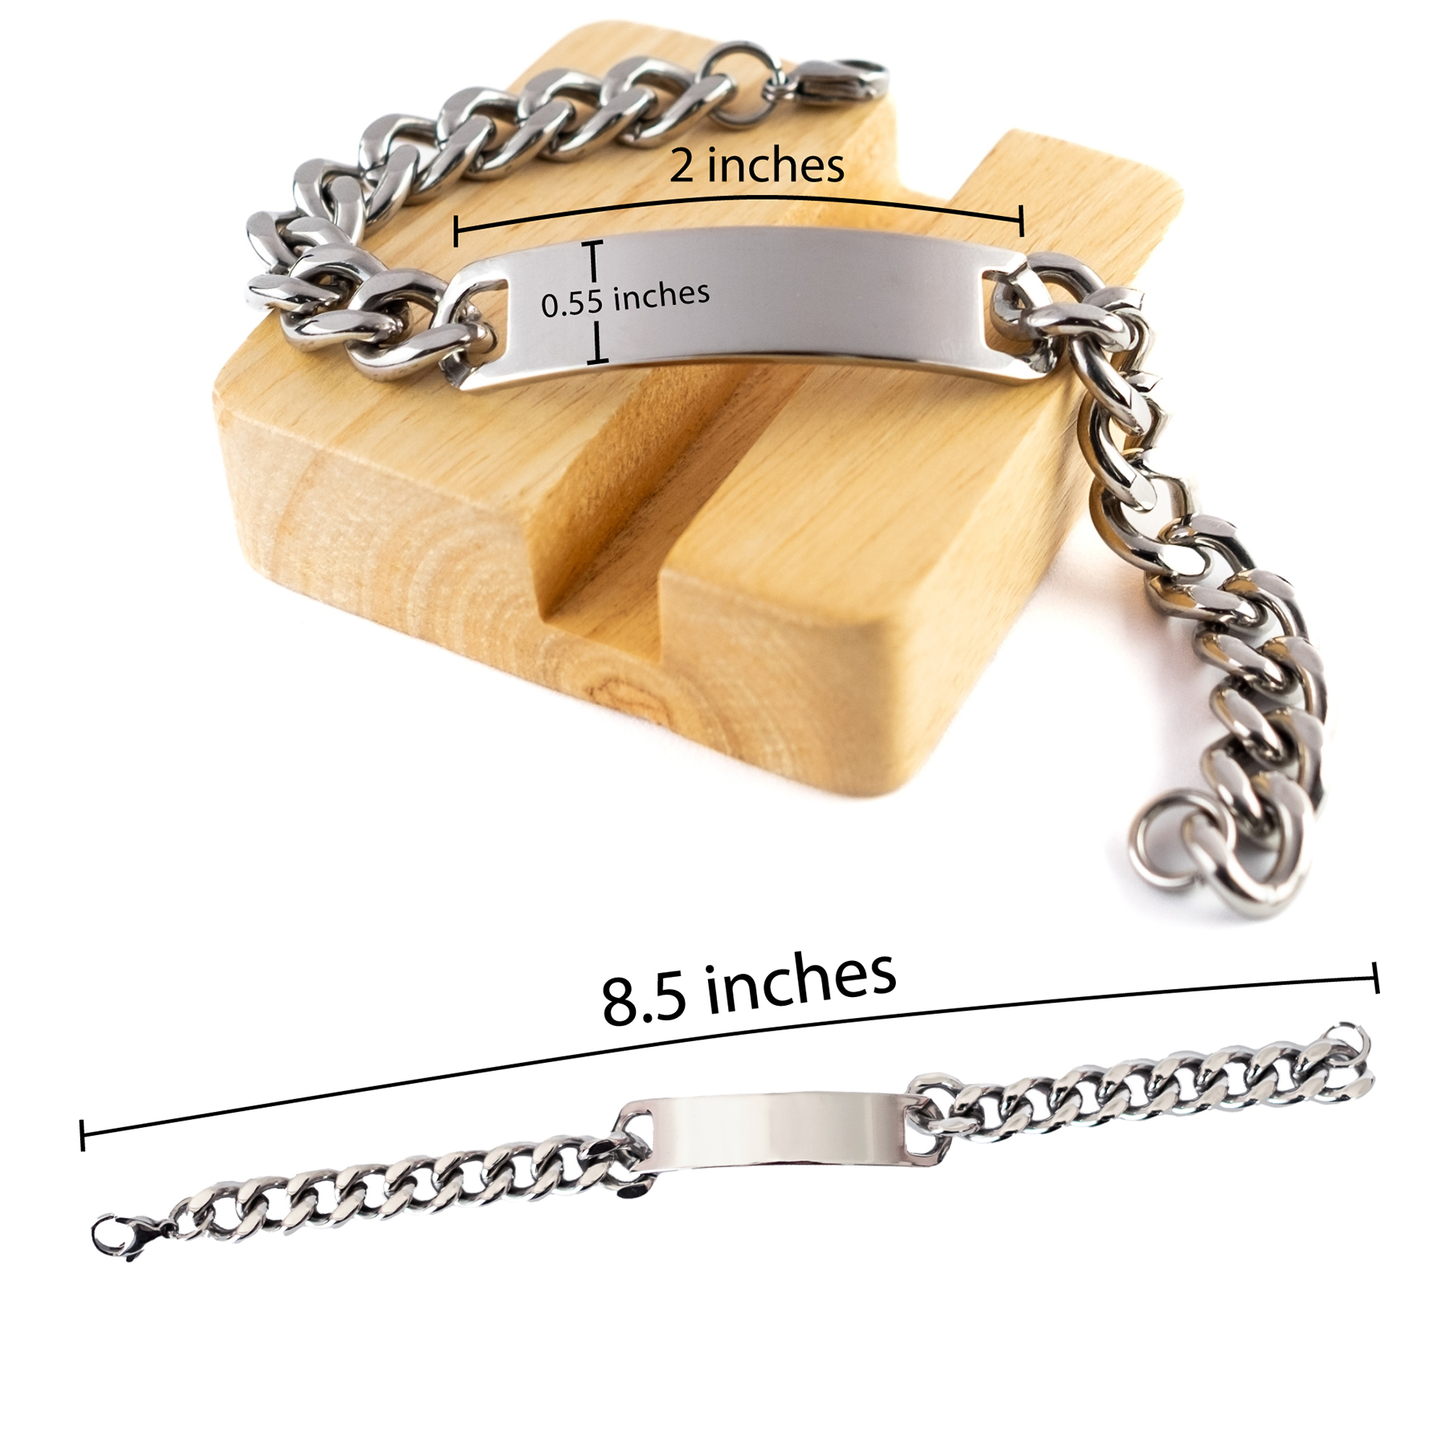 Little Sister Motivational Gifts from Sister, Remember to never give up no matter what, Inspirational Birthday Cuban Chain Stainless Steel Bracelet for Little Sister